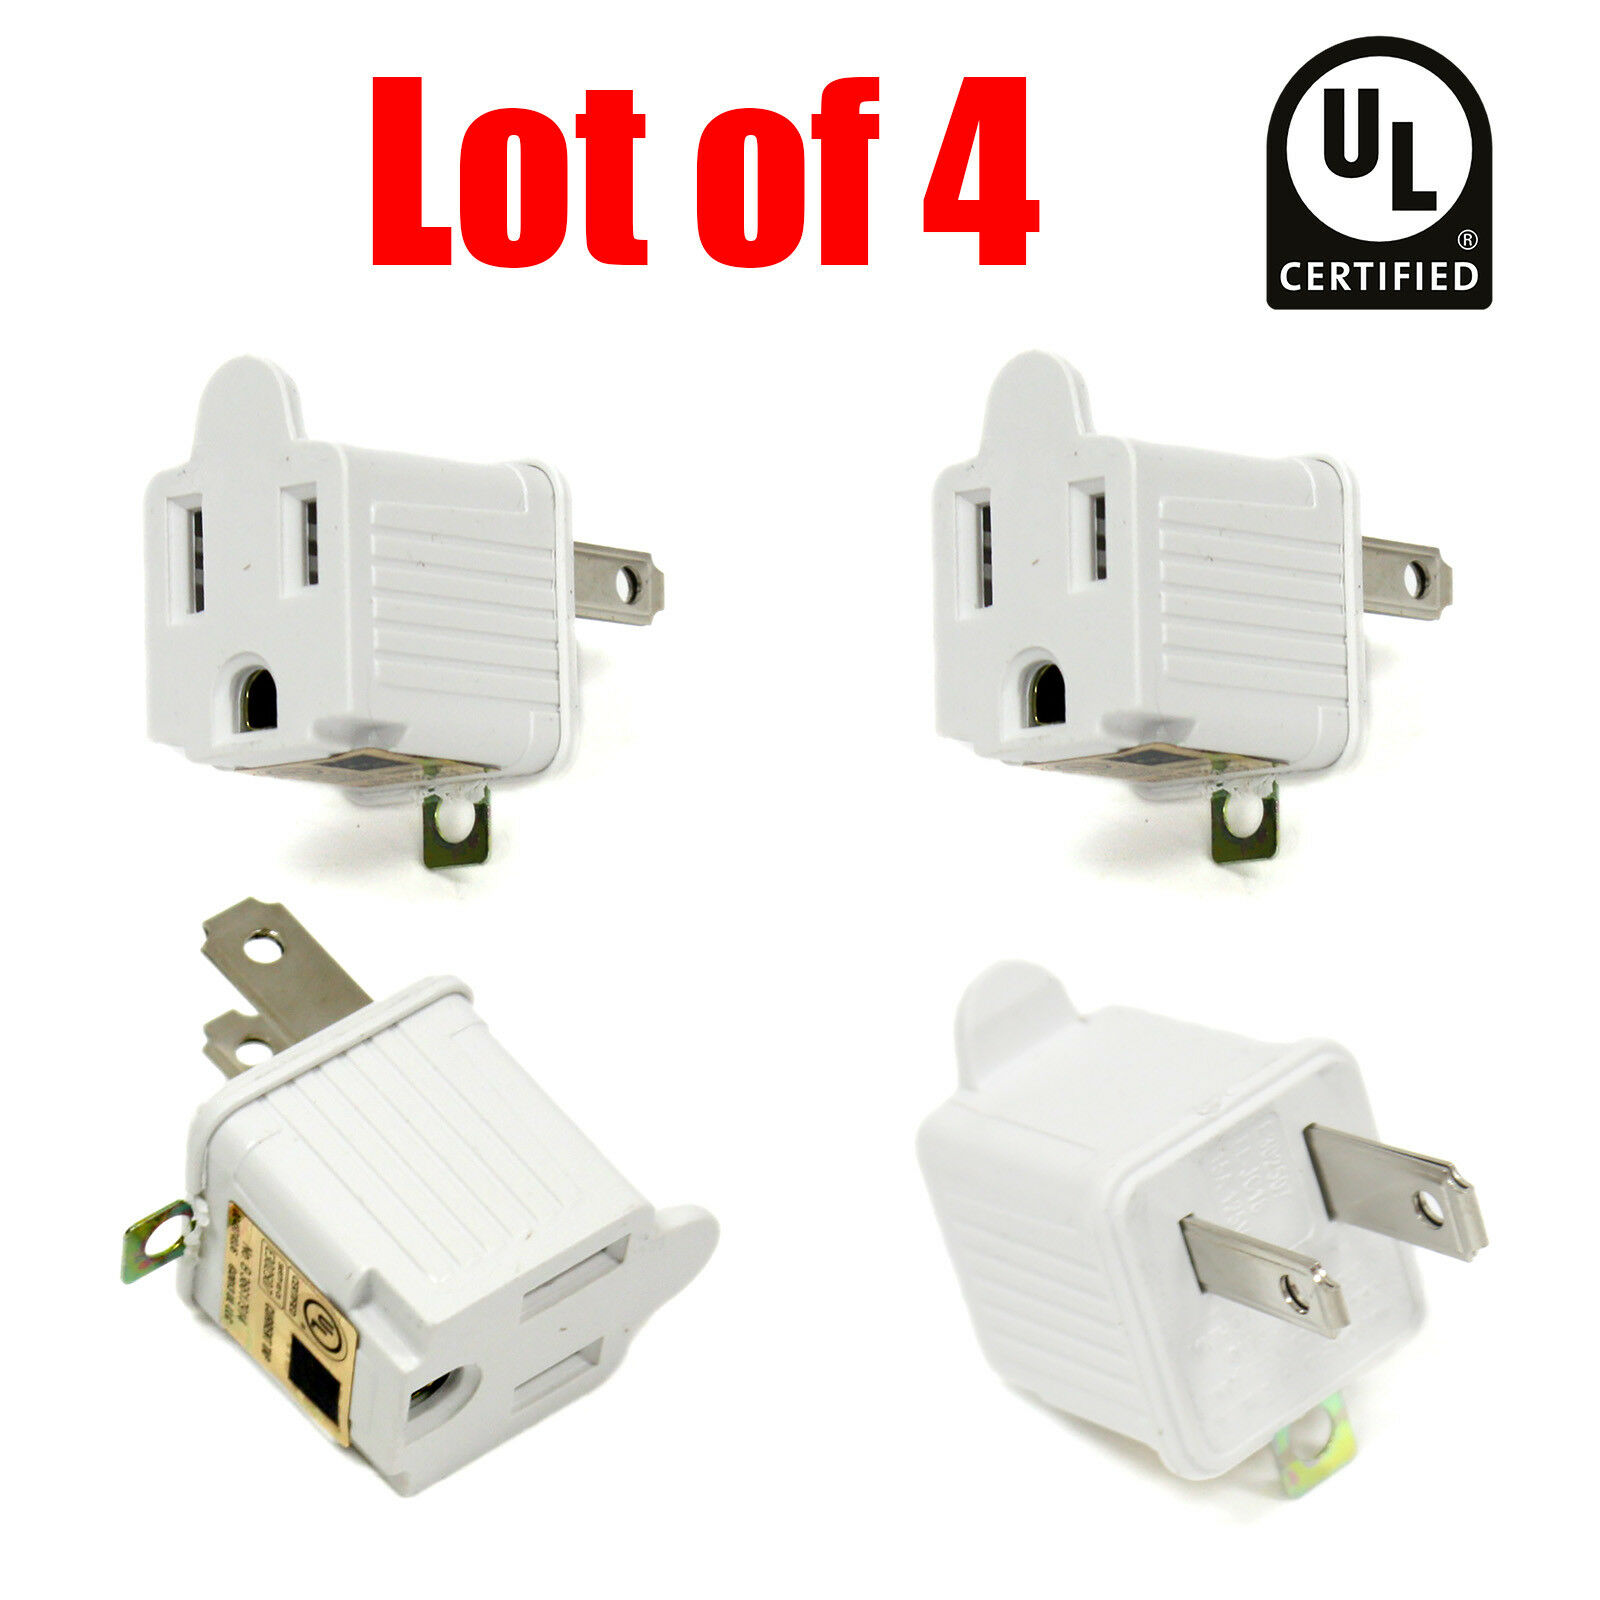 4 Lot3 to 2 Prong UL Certified Adapter AC Outlet Ground Converter Plug White 